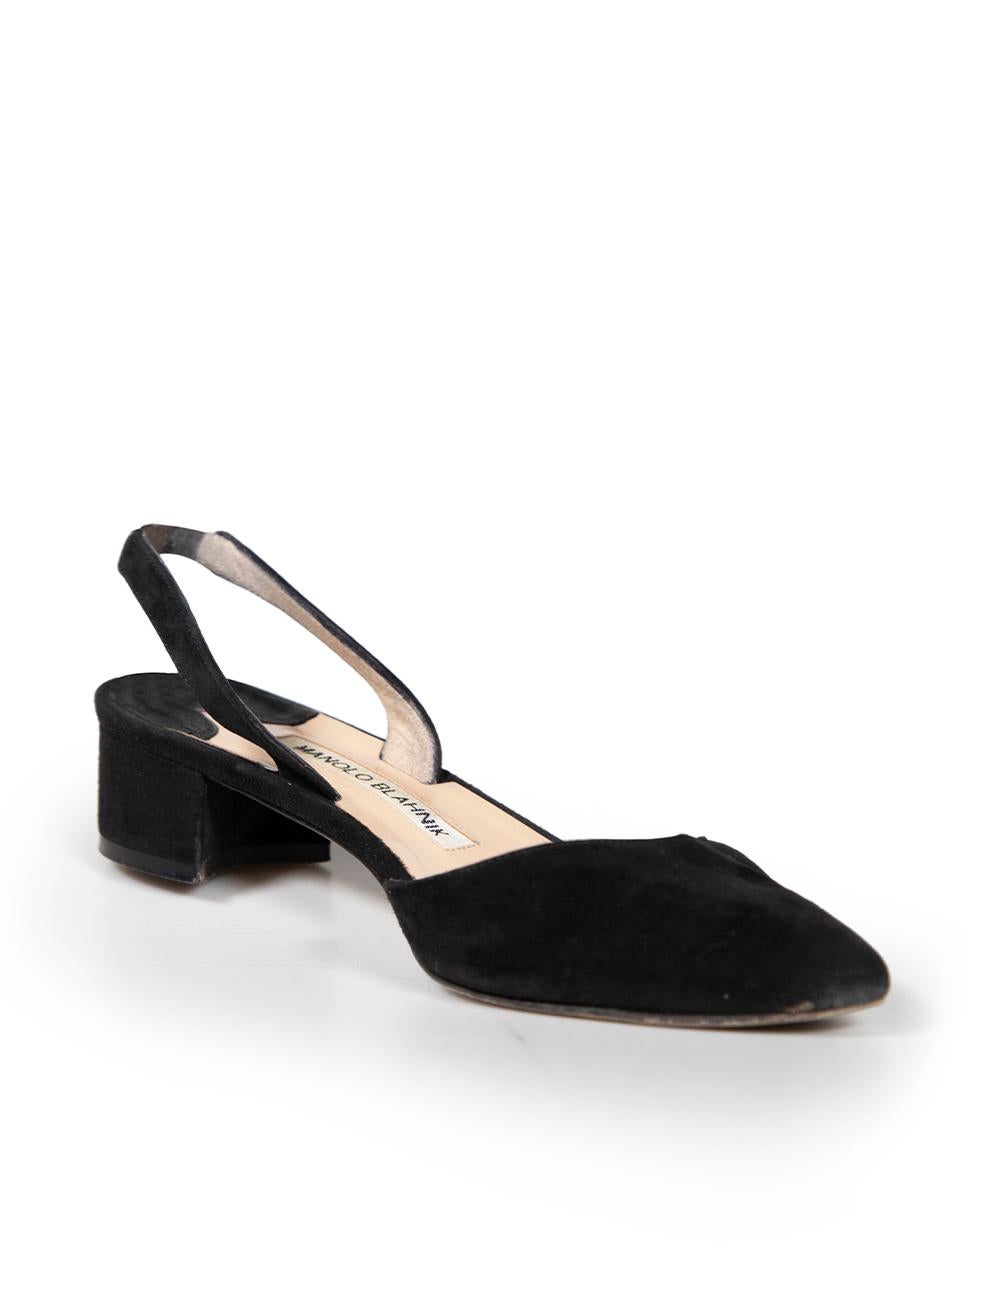 CONDITION is Very good. Minimal wear to pumps is evident. Minimal wear to suede pointed toes and wear to soles on this used Manolo Blahnik designer resale item. These shoes come with original box.
 
 
 
 Details
 
 
 Aspro model
 
 Black
 
 Suede
 
